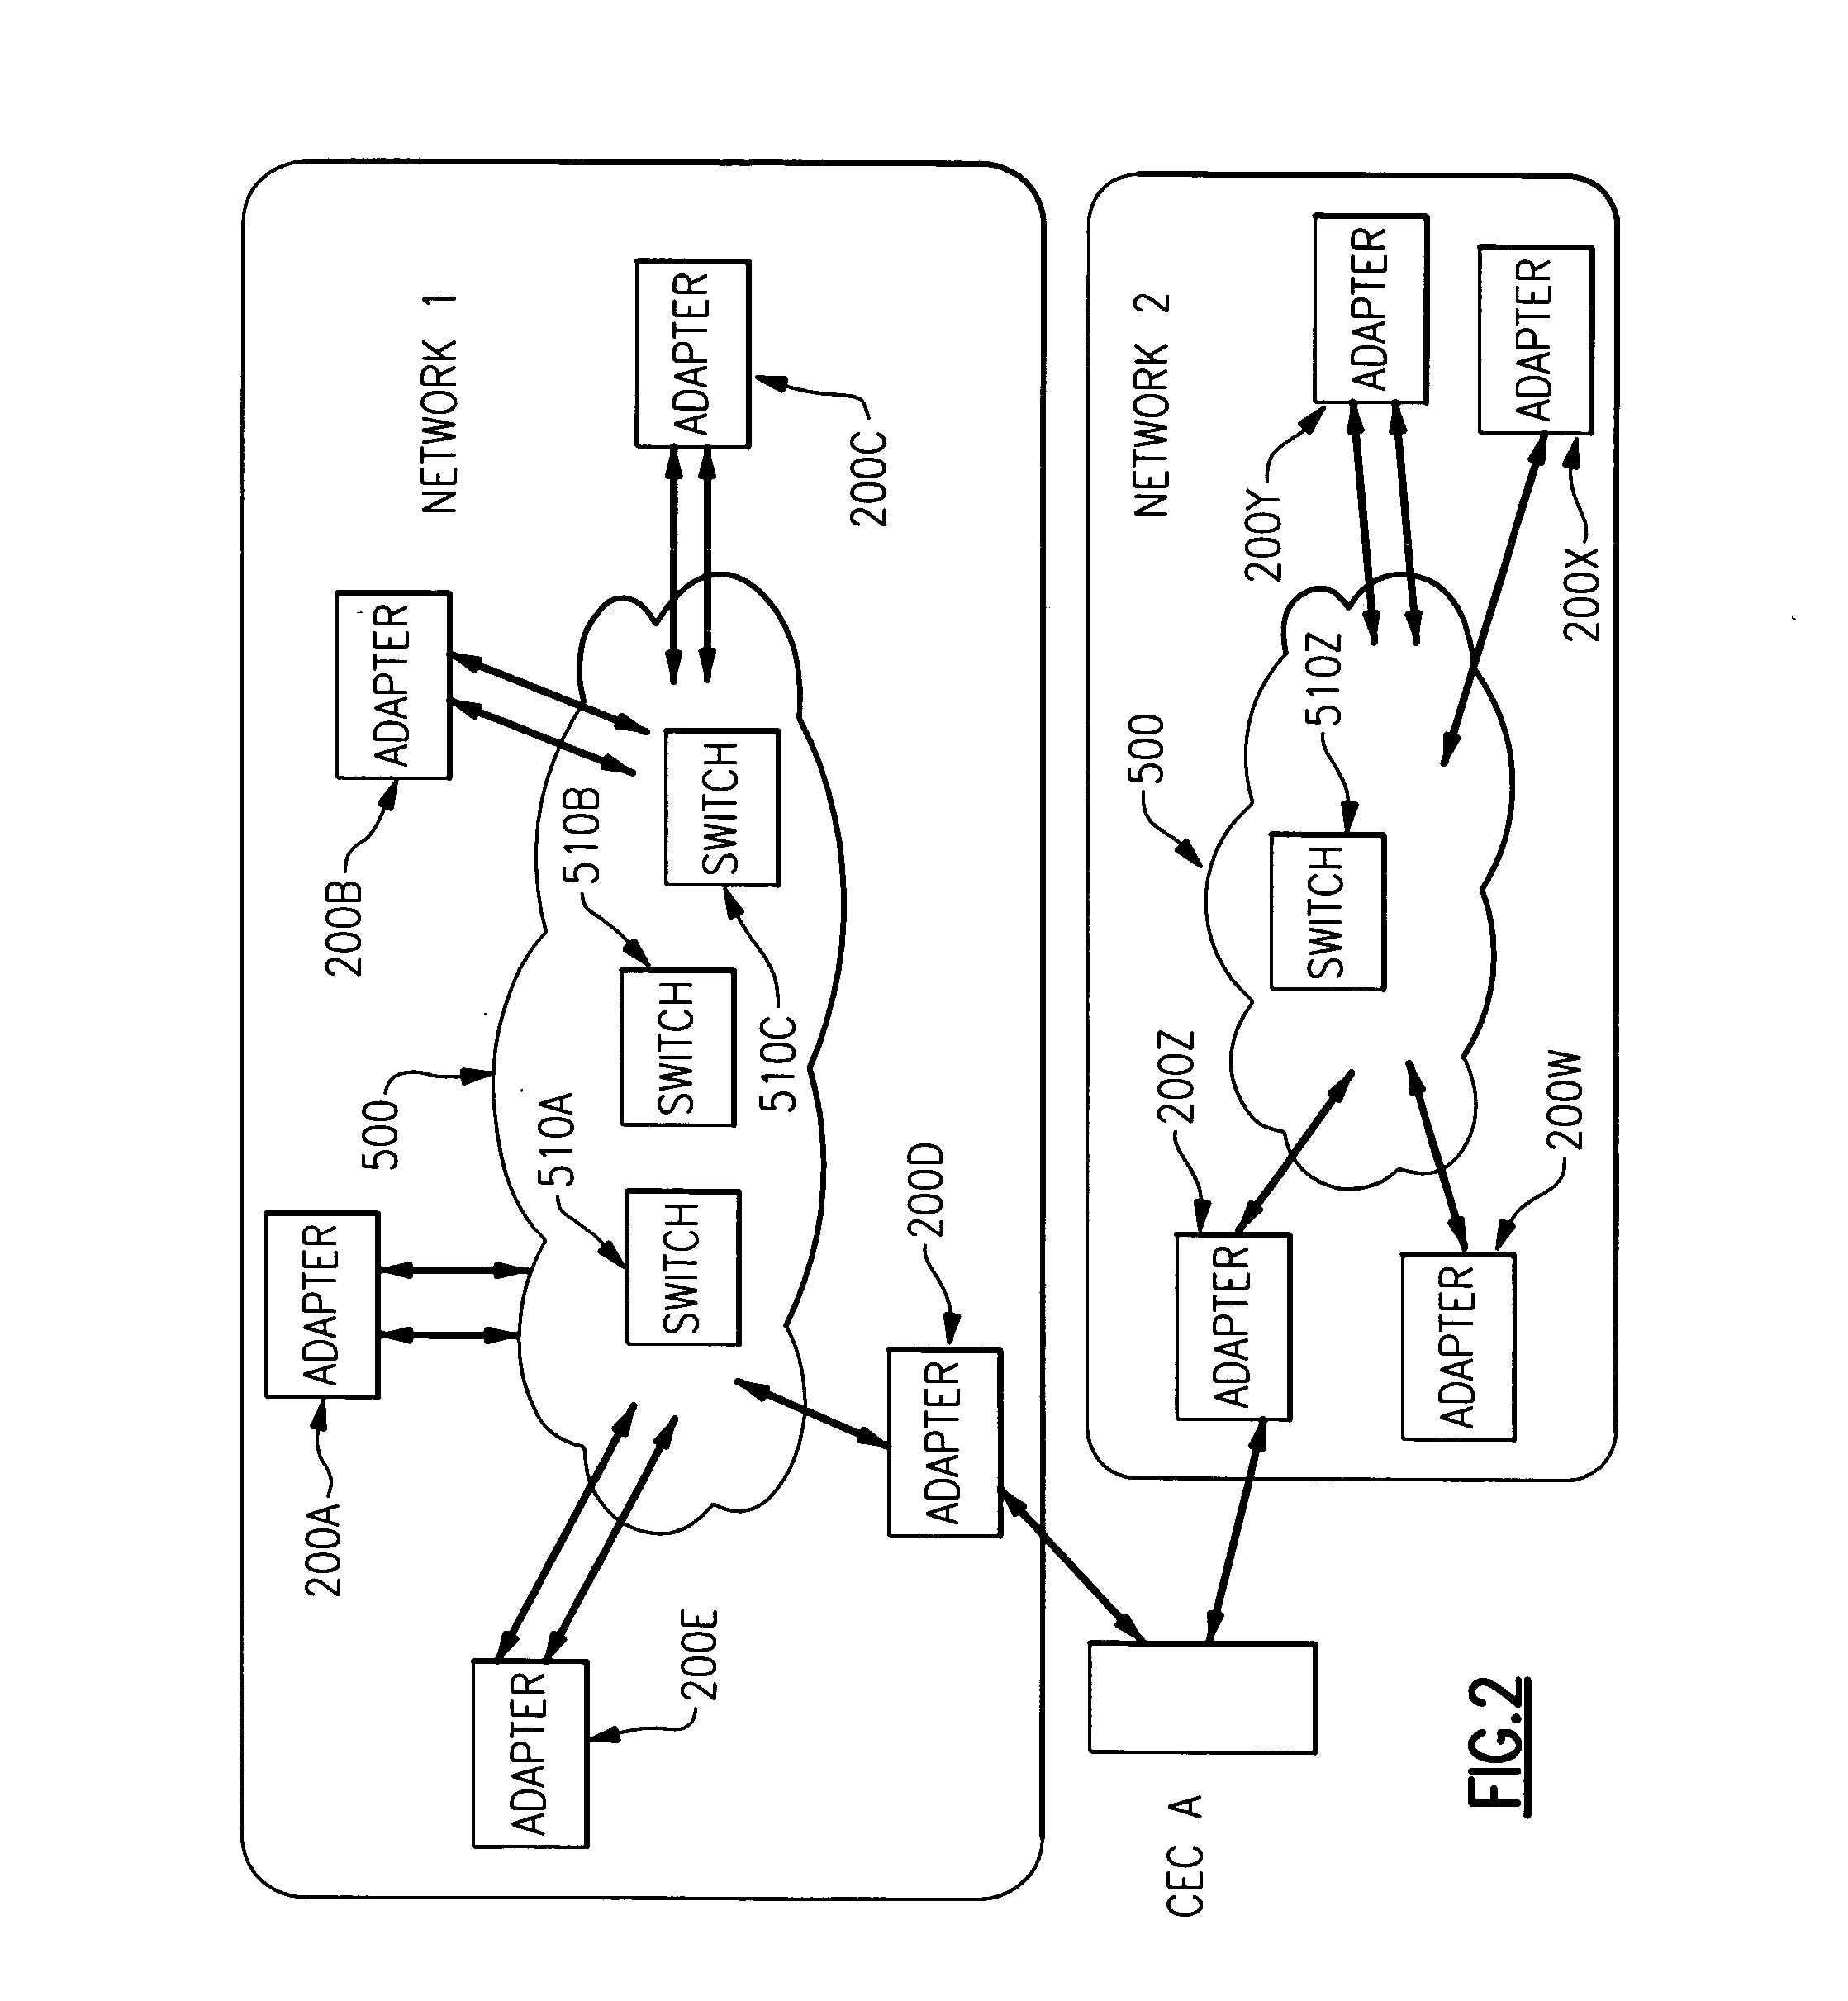 Efficient zero copy transfer of messages between nodes in a data processing system